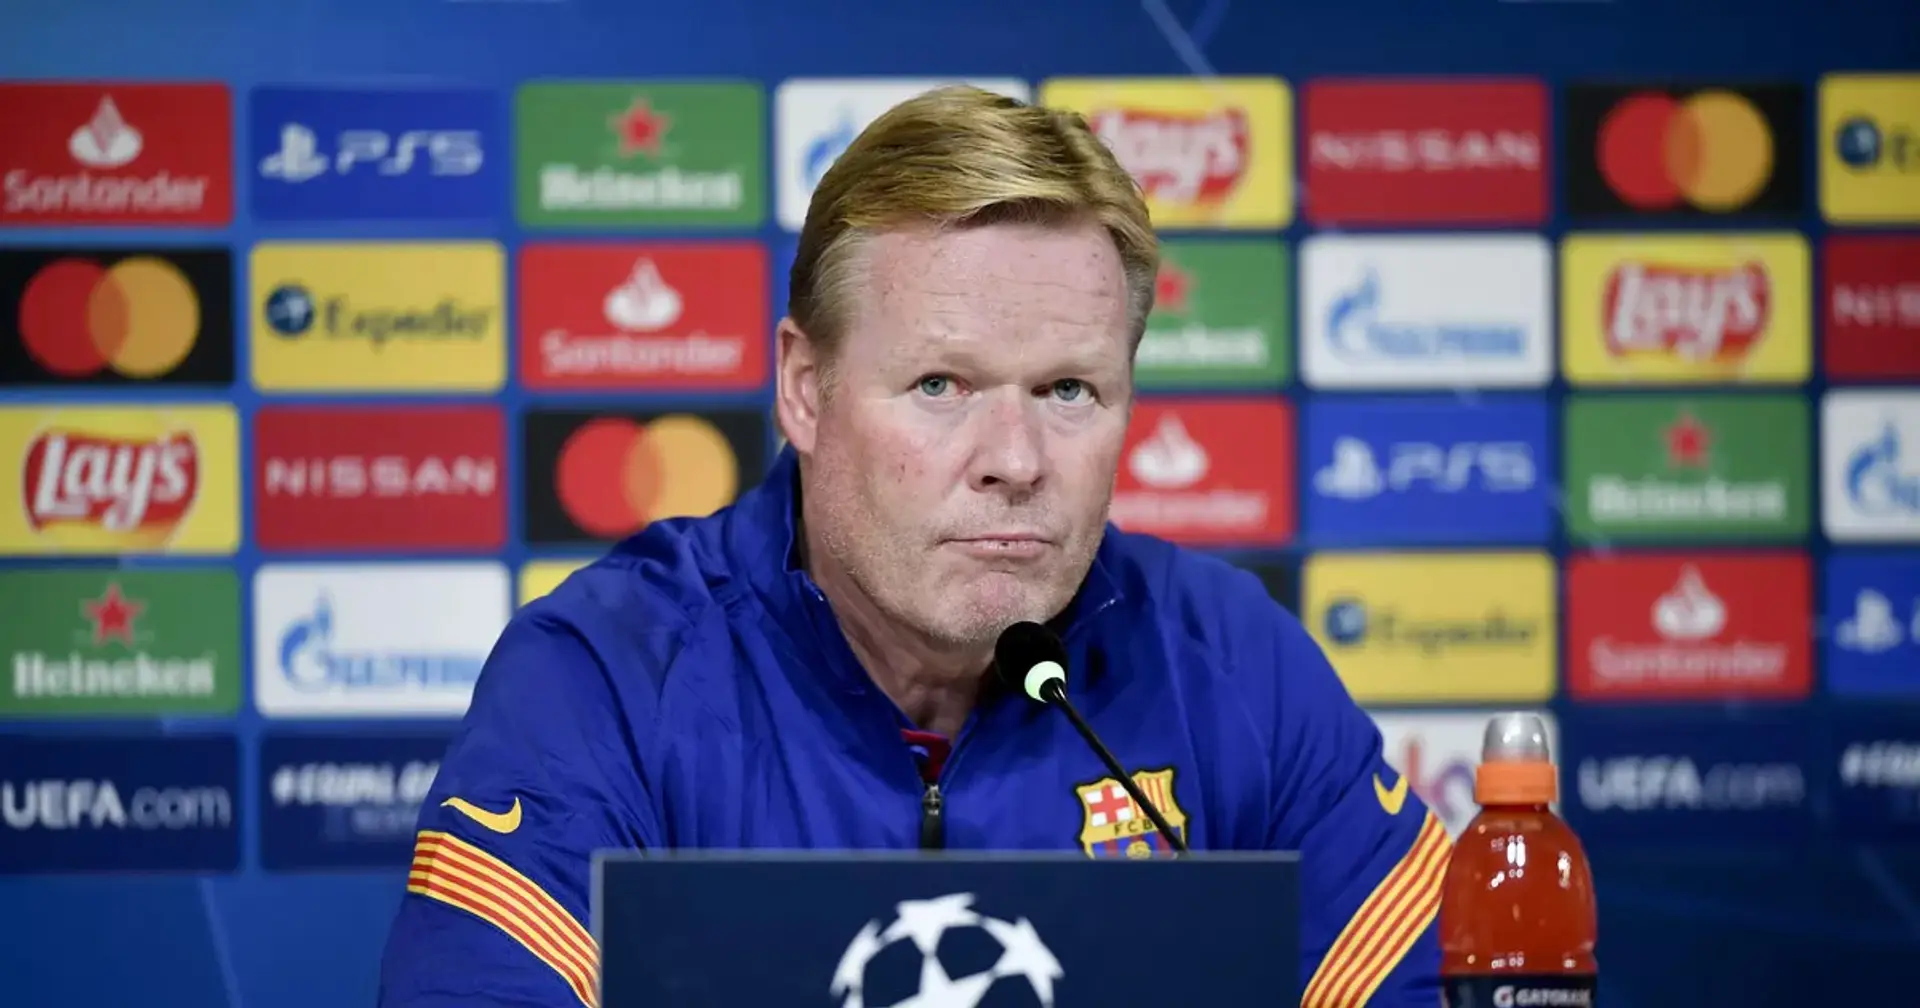 'We have to give chances to younger players': Koeman has perfect solution for Barca's defensive injury crisis